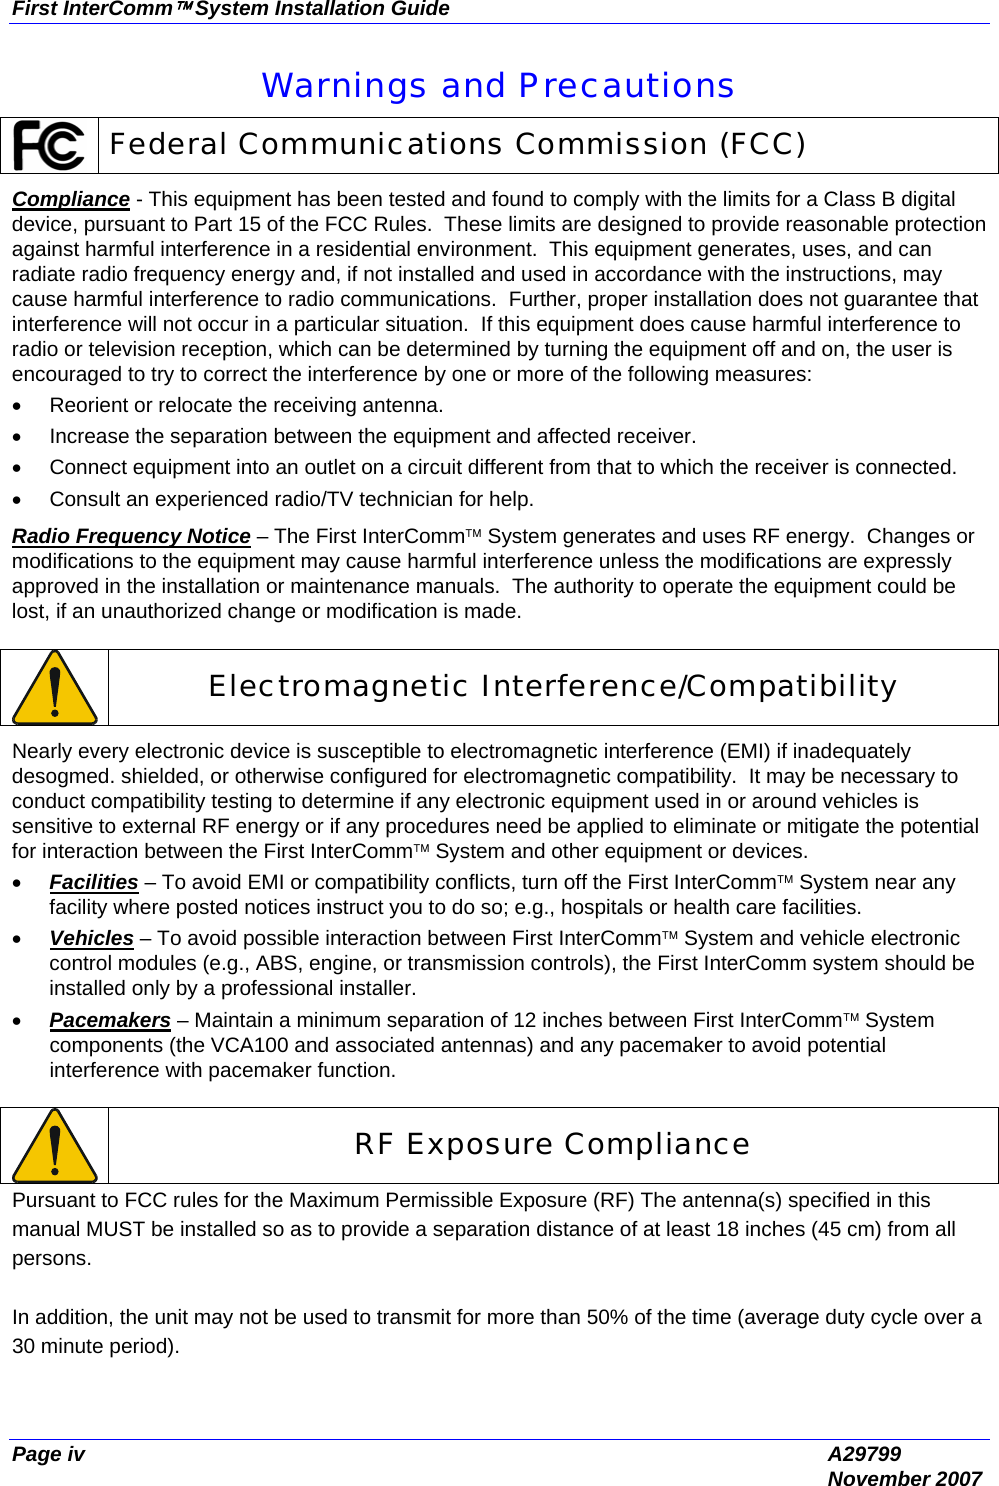 First InterComm™ System Installation Guide Page iv  A29799  November 2007 Warnings and Precautions  Federal Communications Commission (FCC) Compliance - This equipment has been tested and found to comply with the limits for a Class B digital device, pursuant to Part 15 of the FCC Rules.  These limits are designed to provide reasonable protection against harmful interference in a residential environment.  This equipment generates, uses, and can radiate radio frequency energy and, if not installed and used in accordance with the instructions, may cause harmful interference to radio communications.  Further, proper installation does not guarantee that interference will not occur in a particular situation.  If this equipment does cause harmful interference to radio or television reception, which can be determined by turning the equipment off and on, the user is encouraged to try to correct the interference by one or more of the following measures: •  Reorient or relocate the receiving antenna. •  Increase the separation between the equipment and affected receiver. •  Connect equipment into an outlet on a circuit different from that to which the receiver is connected. •  Consult an experienced radio/TV technician for help. Radio Frequency Notice – The First InterComm™ System generates and uses RF energy.  Changes or modifications to the equipment may cause harmful interference unless the modifications are expressly approved in the installation or maintenance manuals.  The authority to operate the equipment could be lost, if an unauthorized change or modification is made.   Electromagnetic Interference/Compatibility Nearly every electronic device is susceptible to electromagnetic interference (EMI) if inadequately desogmed. shielded, or otherwise configured for electromagnetic compatibility.  It may be necessary to conduct compatibility testing to determine if any electronic equipment used in or around vehicles is sensitive to external RF energy or if any procedures need be applied to eliminate or mitigate the potential for interaction between the First InterComm™ System and other equipment or devices. • Facilities – To avoid EMI or compatibility conflicts, turn off the First InterComm™ System near any facility where posted notices instruct you to do so; e.g., hospitals or health care facilities.  • Vehicles – To avoid possible interaction between First InterComm™ System and vehicle electronic control modules (e.g., ABS, engine, or transmission controls), the First InterComm system should be installed only by a professional installer. • Pacemakers – Maintain a minimum separation of 12 inches between First InterComm™ System components (the VCA100 and associated antennas) and any pacemaker to avoid potential interference with pacemaker function.   RF Exposure Compliance Pursuant to FCC rules for the Maximum Permissible Exposure (RF) The antenna(s) specified in this manual MUST be installed so as to provide a separation distance of at least 18 inches (45 cm) from all persons.  In addition, the unit may not be used to transmit for more than 50% of the time (average duty cycle over a 30 minute period). 